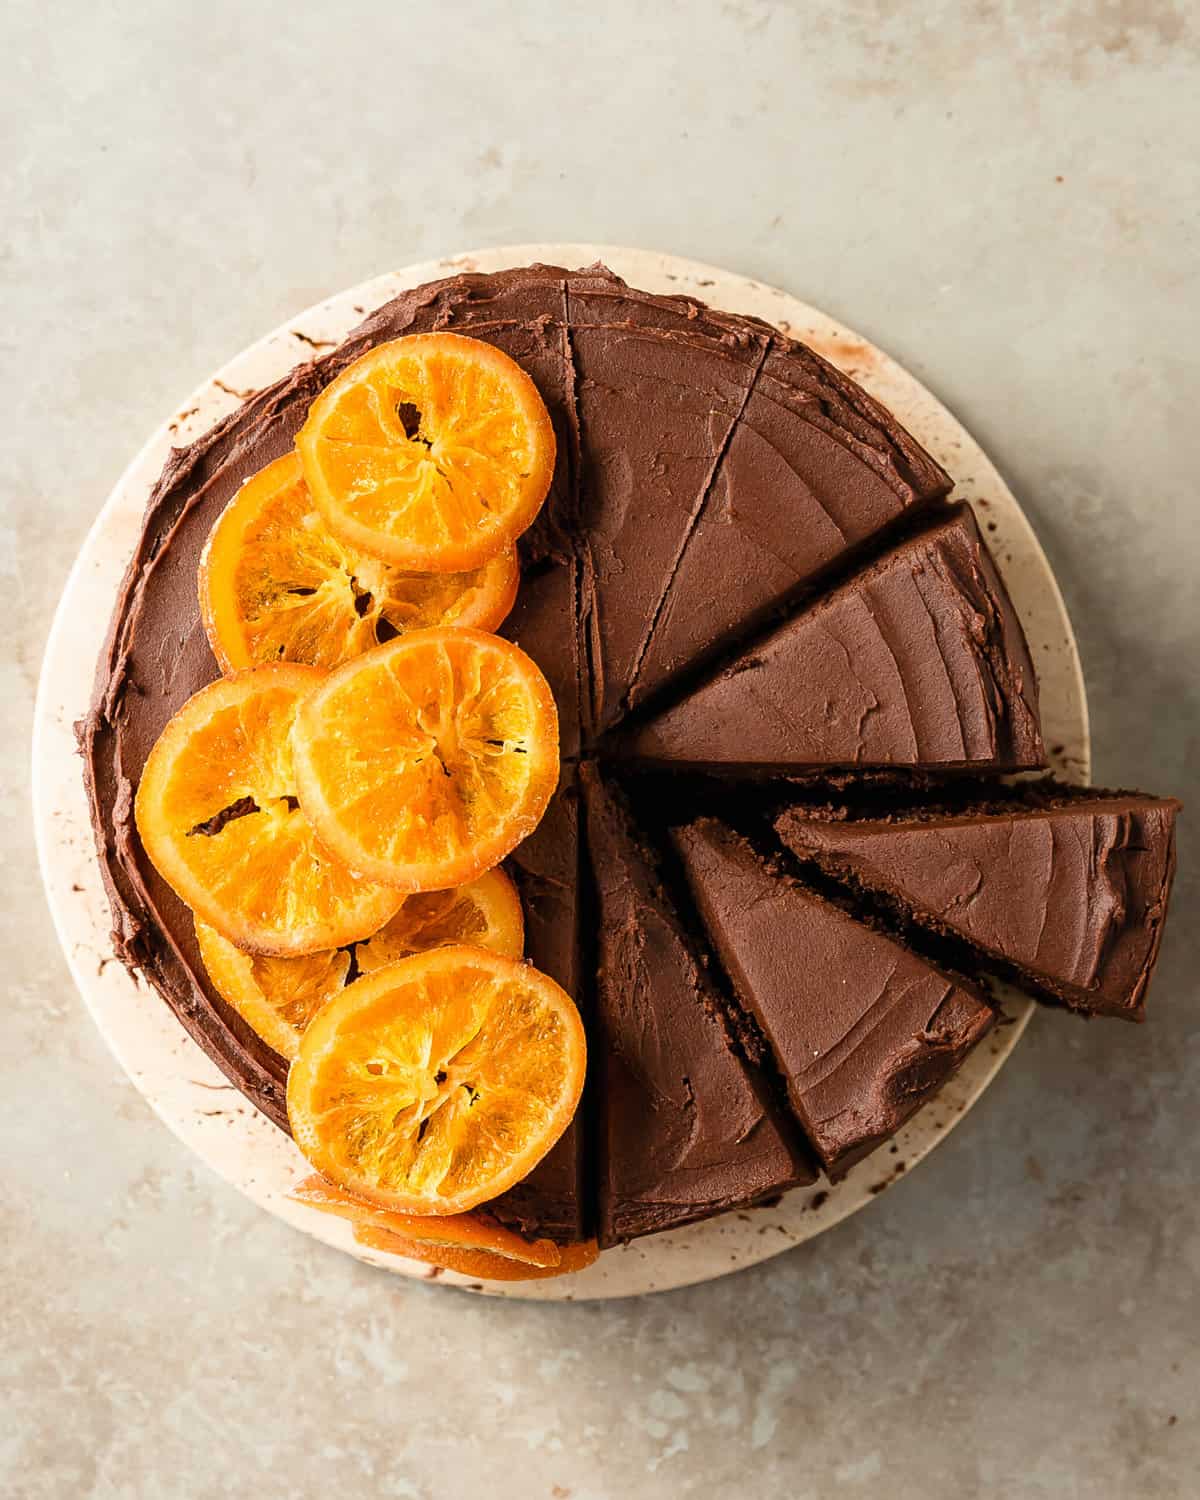 Chocolate orange cake is a rich, moist and decadent chocolate cake filled with fresh orange flavor. This orange chocolate cake is layered with a whipped chocolate orange frosting and orange marmalade. Despite it’s bakery worthy appearance, this easy to make chocolate and orange cake is easy to make and is perfect for any holiday or celebratory dessert. 